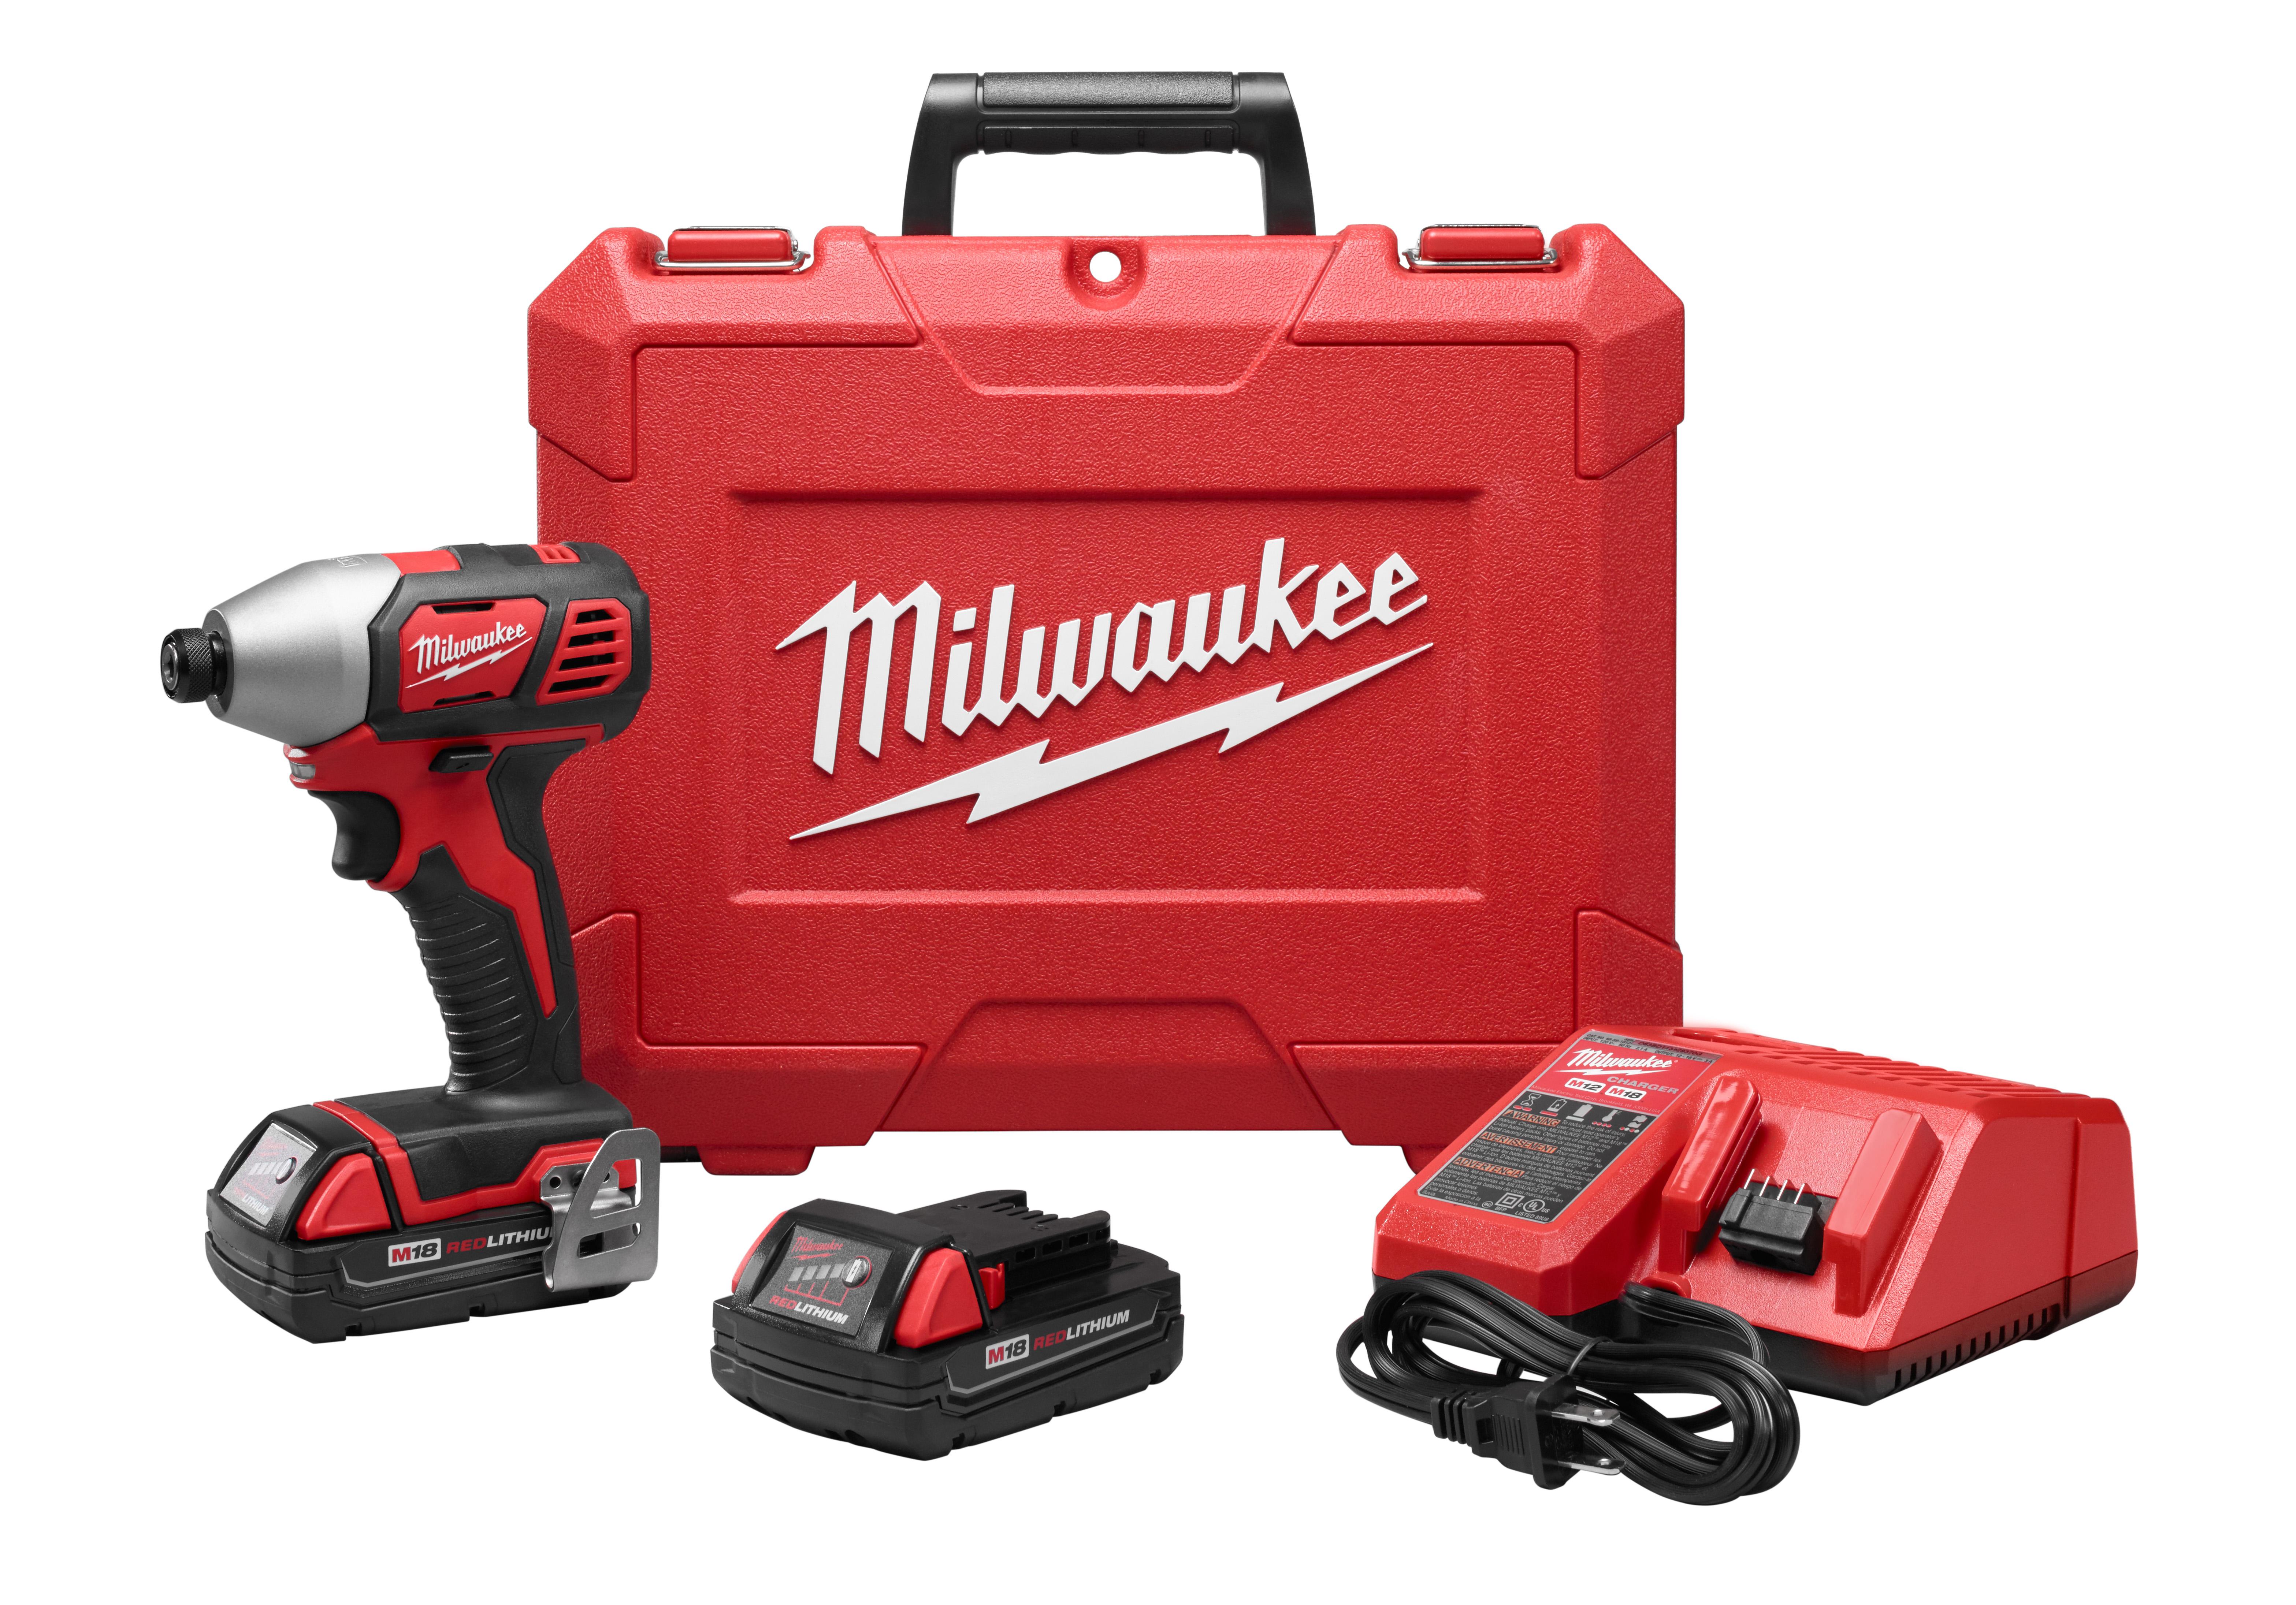 Milwaukee® M18™ 2656-20 Compact Cordless Impact Driver, 1/4 in Hex/Straight Drive, 3450 bpm, 1500 in-lb Torque, 18 VAC, 5-1/2 in OAL